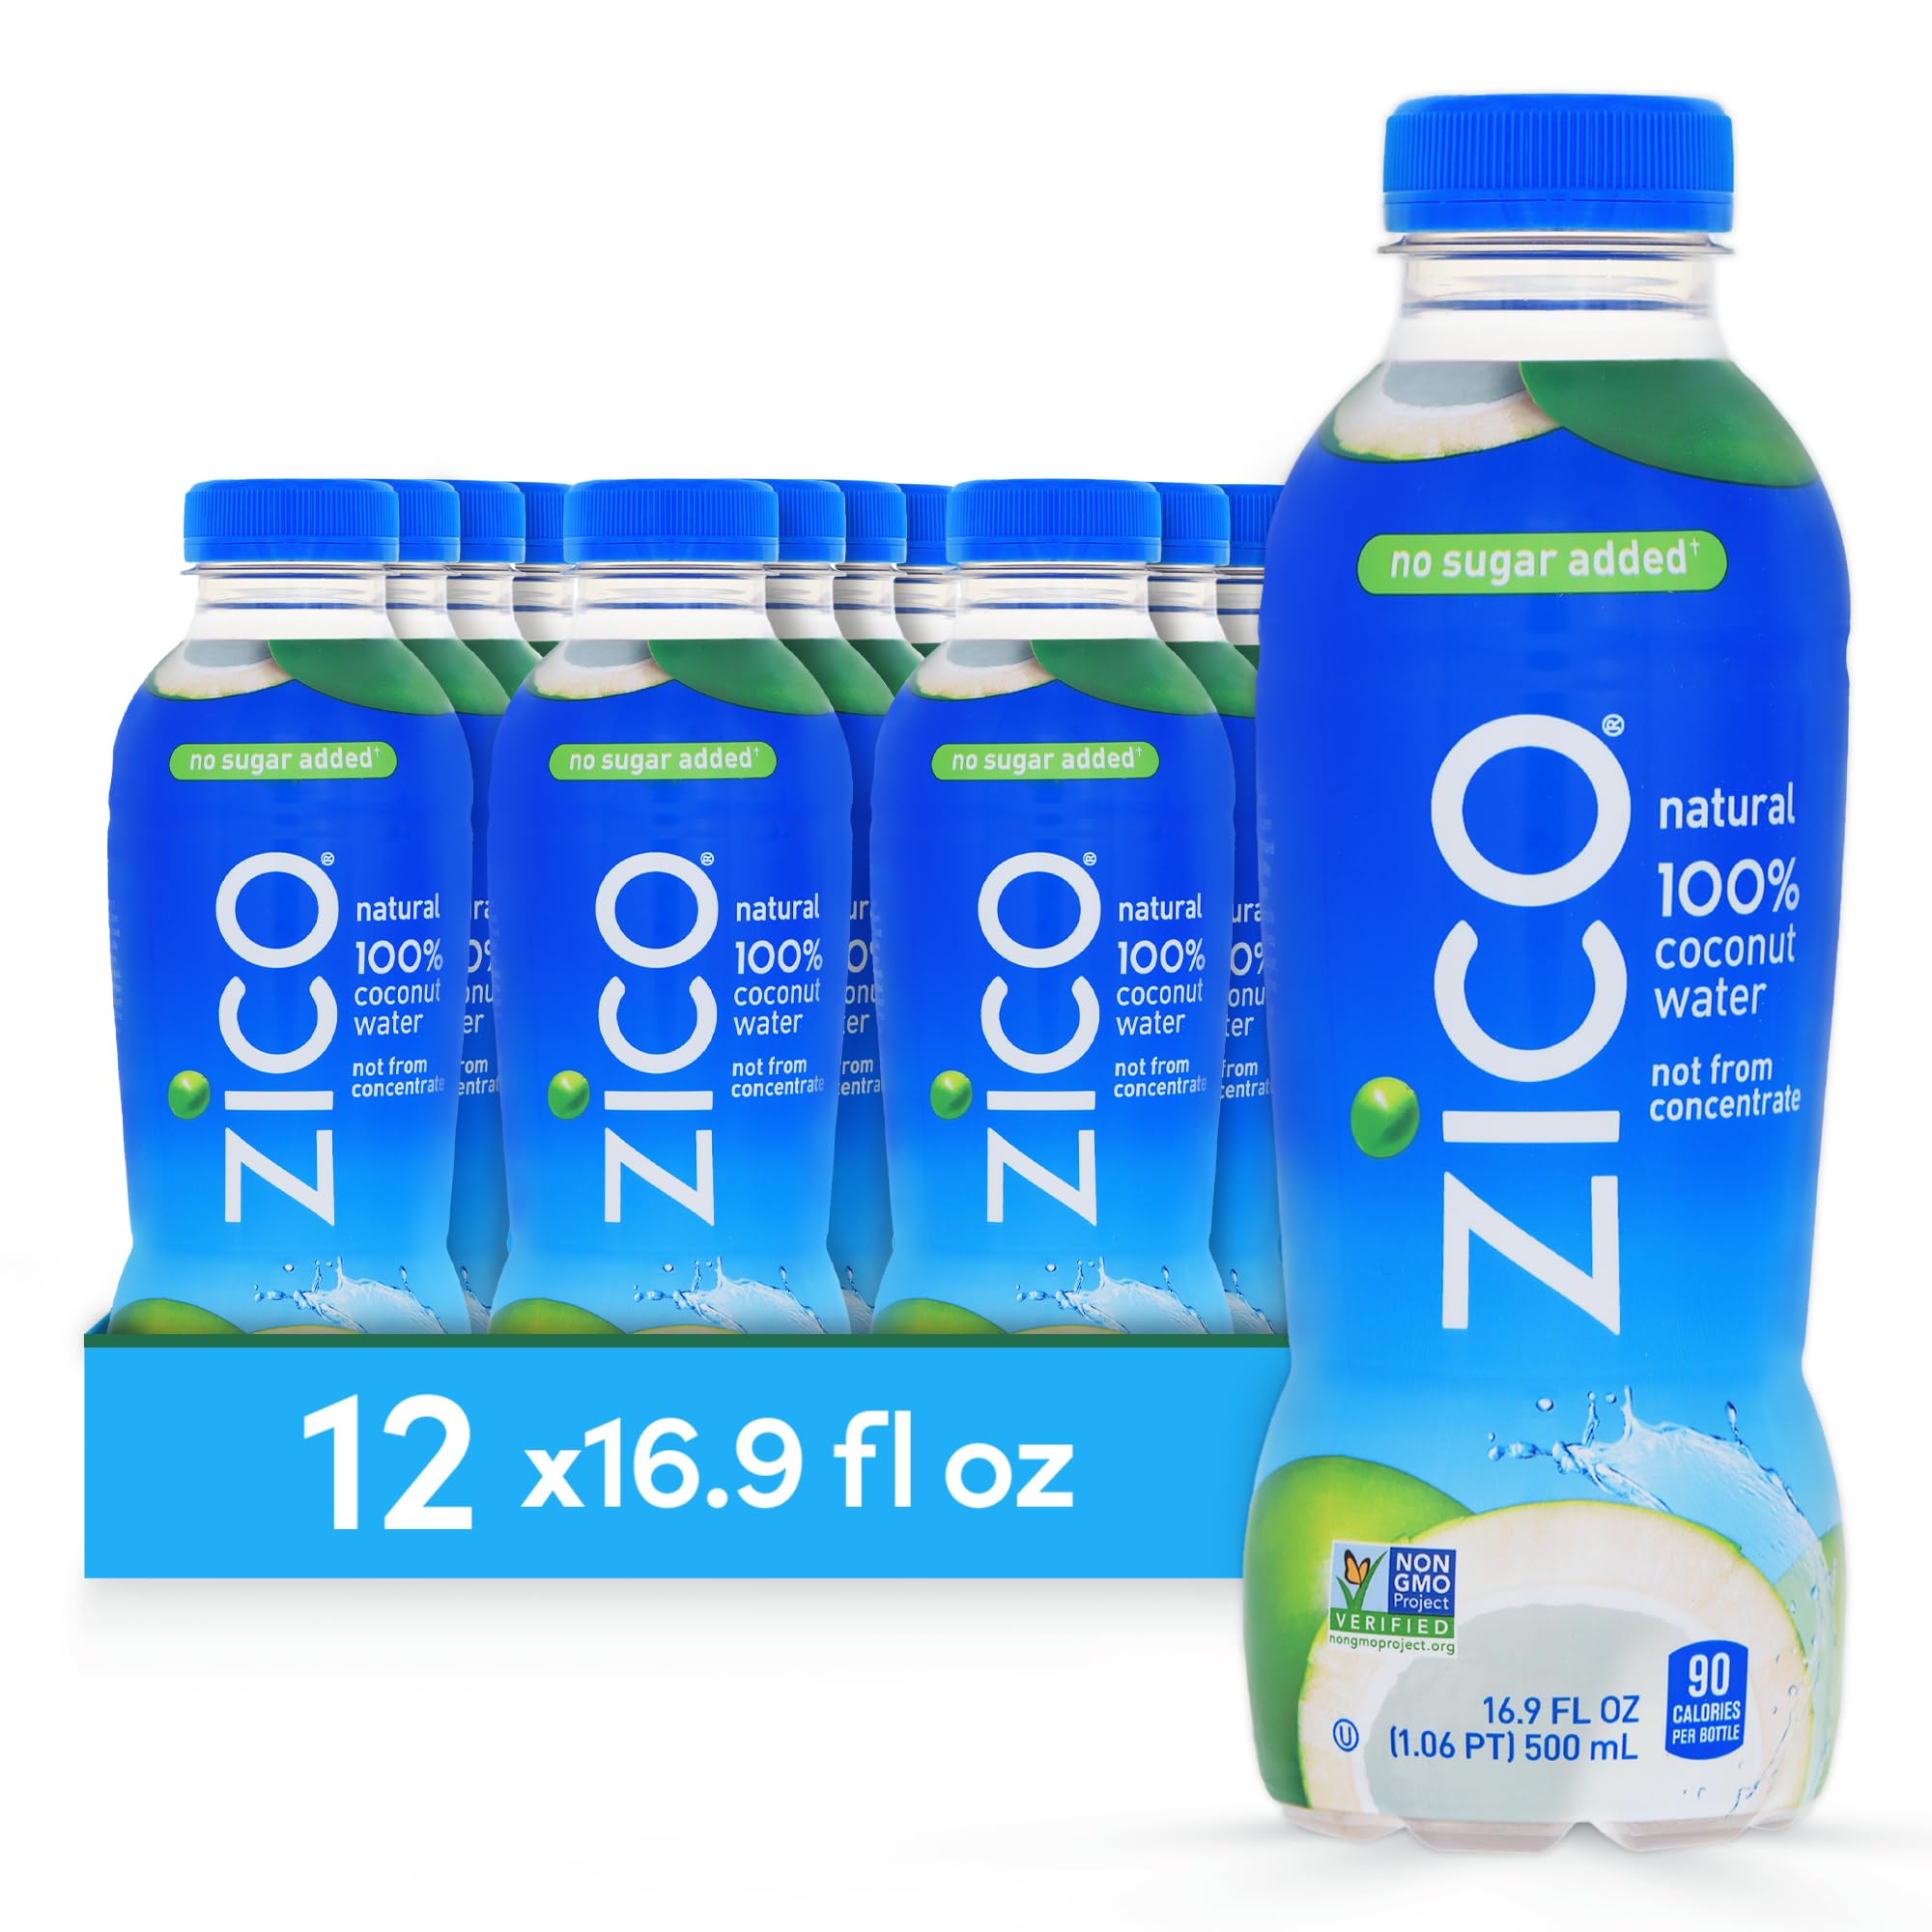 Zico 100% Coconut Water Drink - 12 Pack, Natural Flavored - No Sugar Added, Gluten-Free - 500ml / 16.9 Fl Oz  as low as $14.97 $14.96